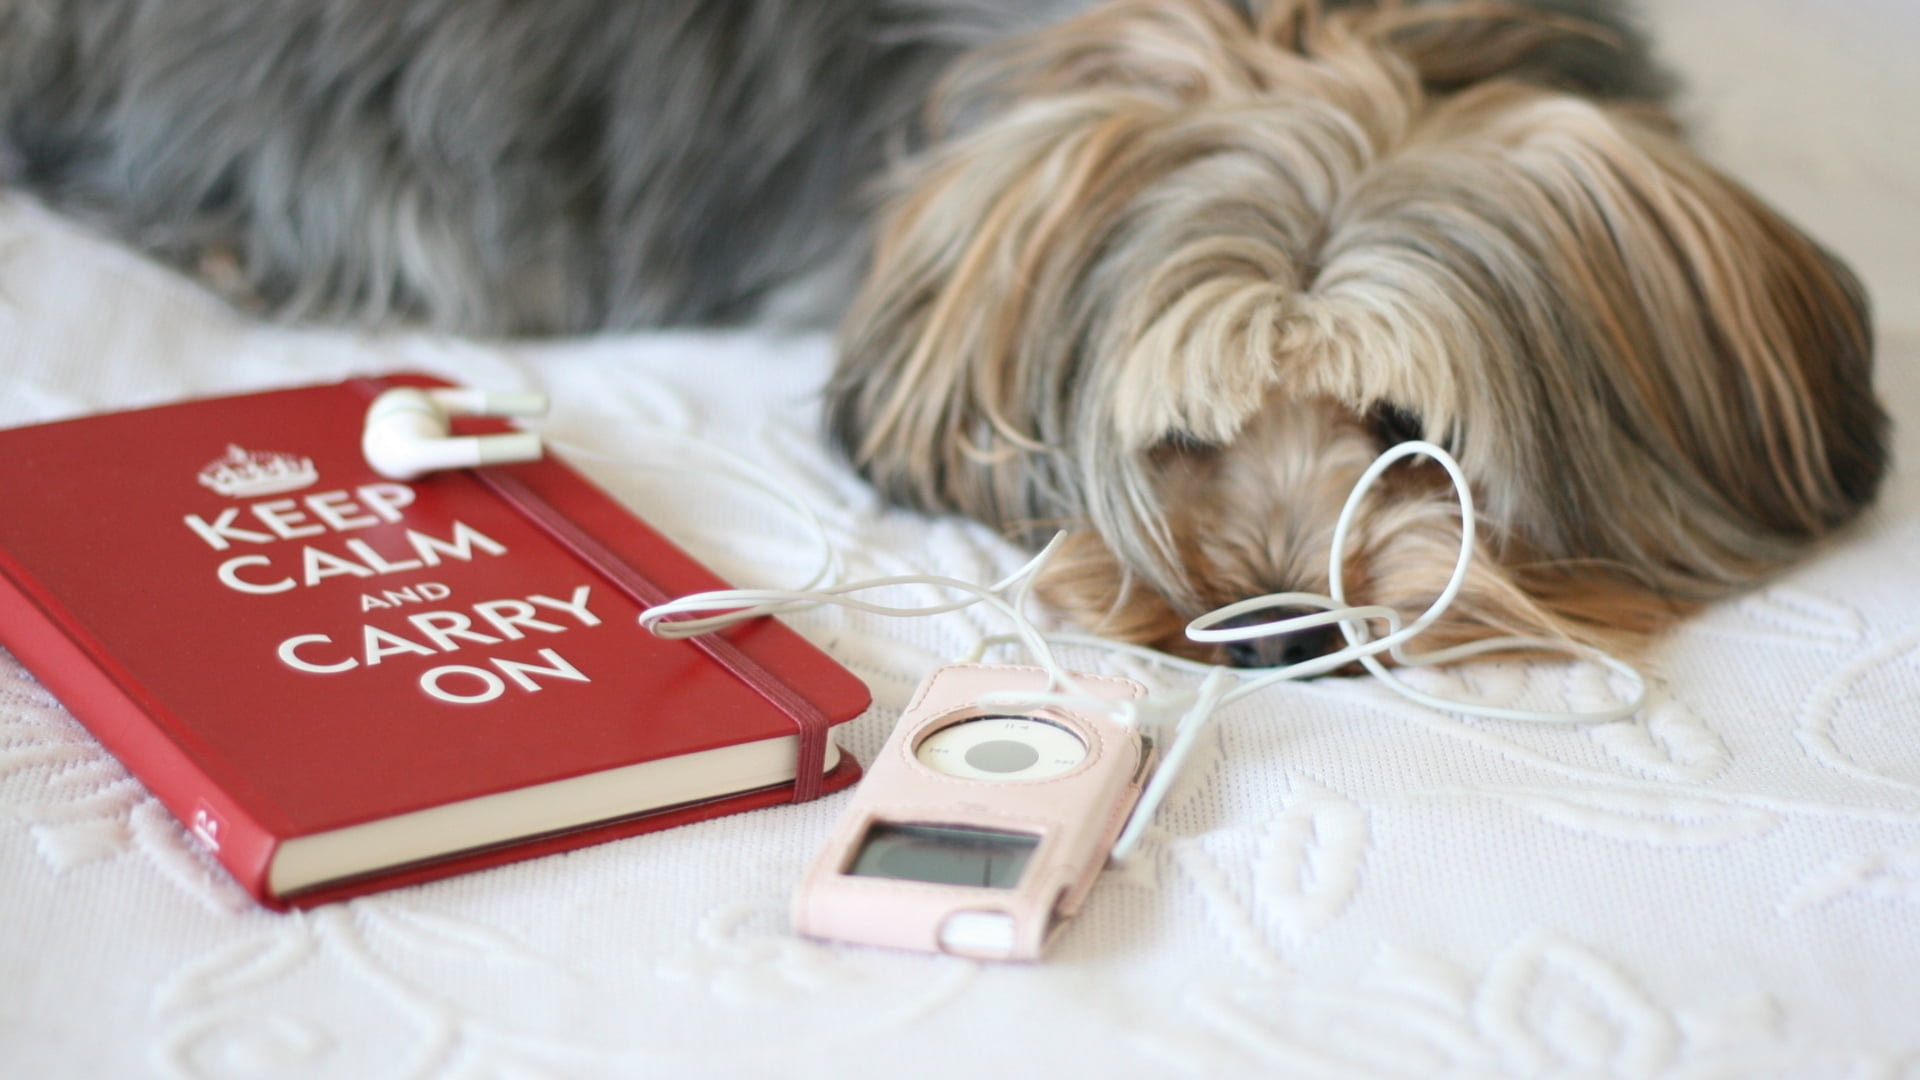 long-coated black and fawn puppy lying beside music player and red Keep Calm and Carry On book